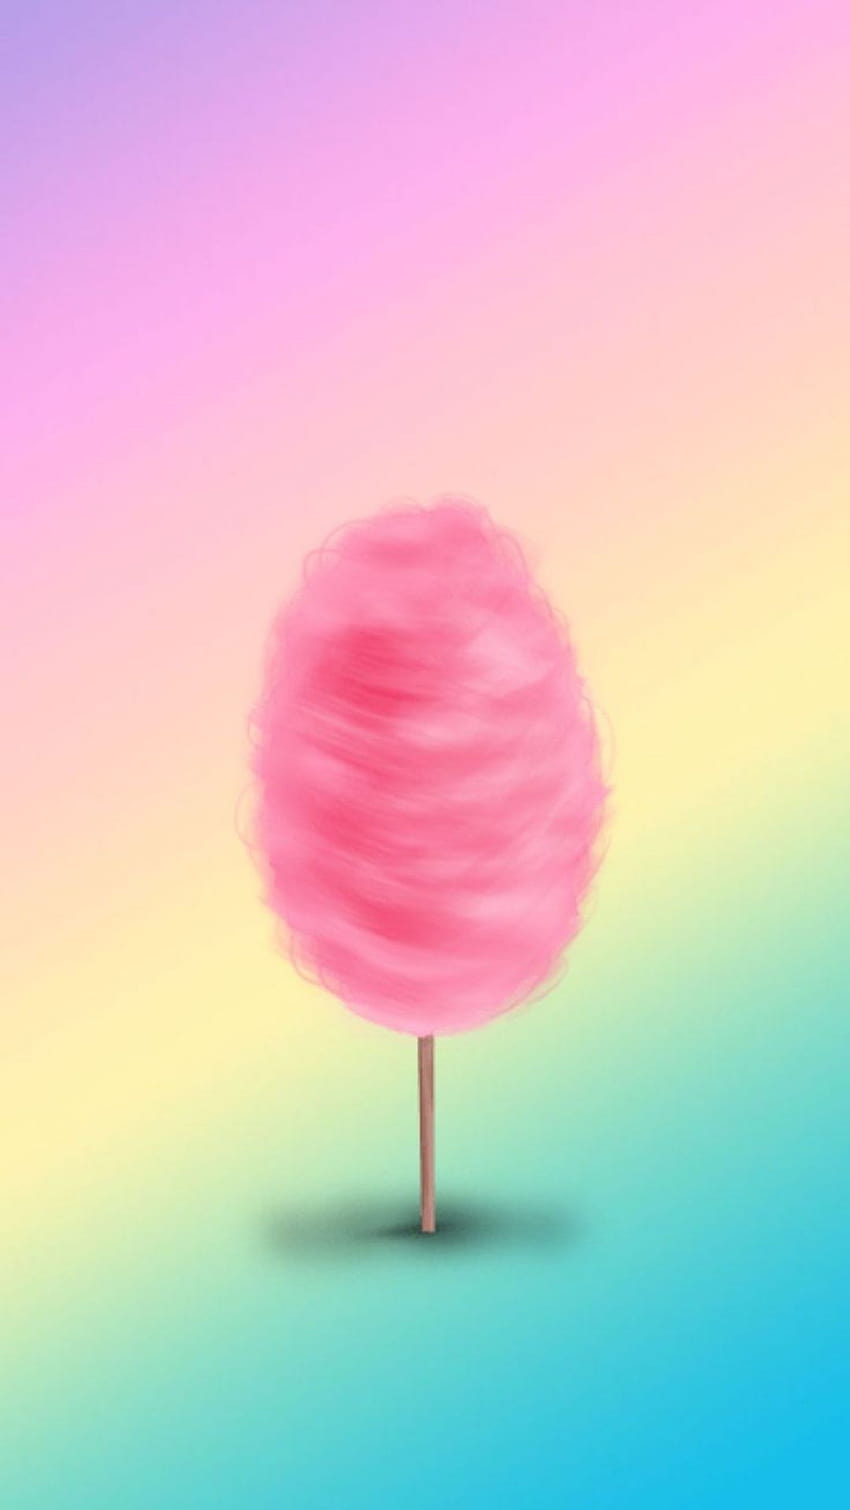 Iphone Cotton Candy, cotton candy aesthetic HD phone wallpaper